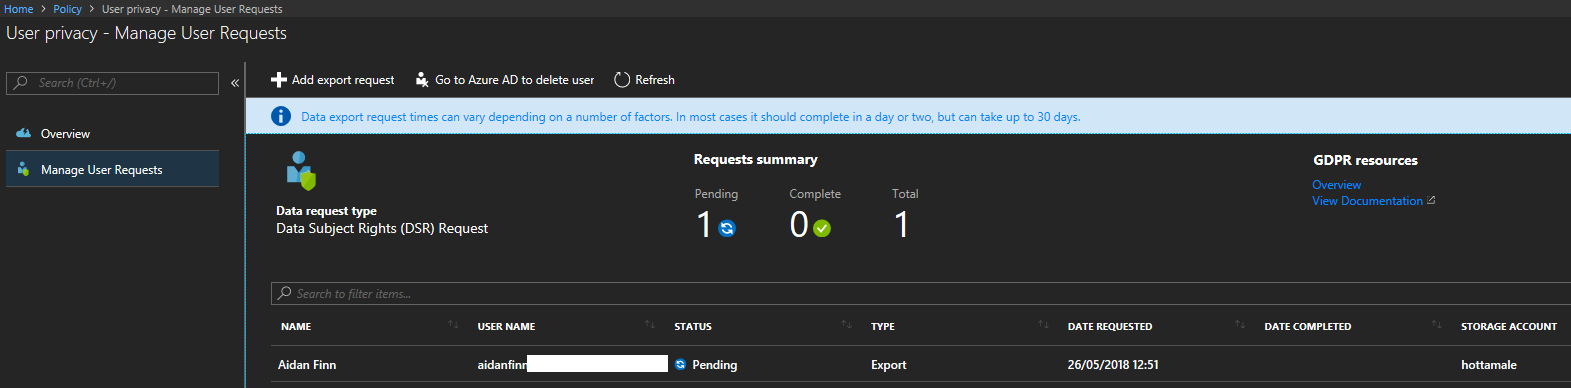 Exporting data for a GDPR data subject request (DSR) in Azure [Image Credit: Aidan Finn]